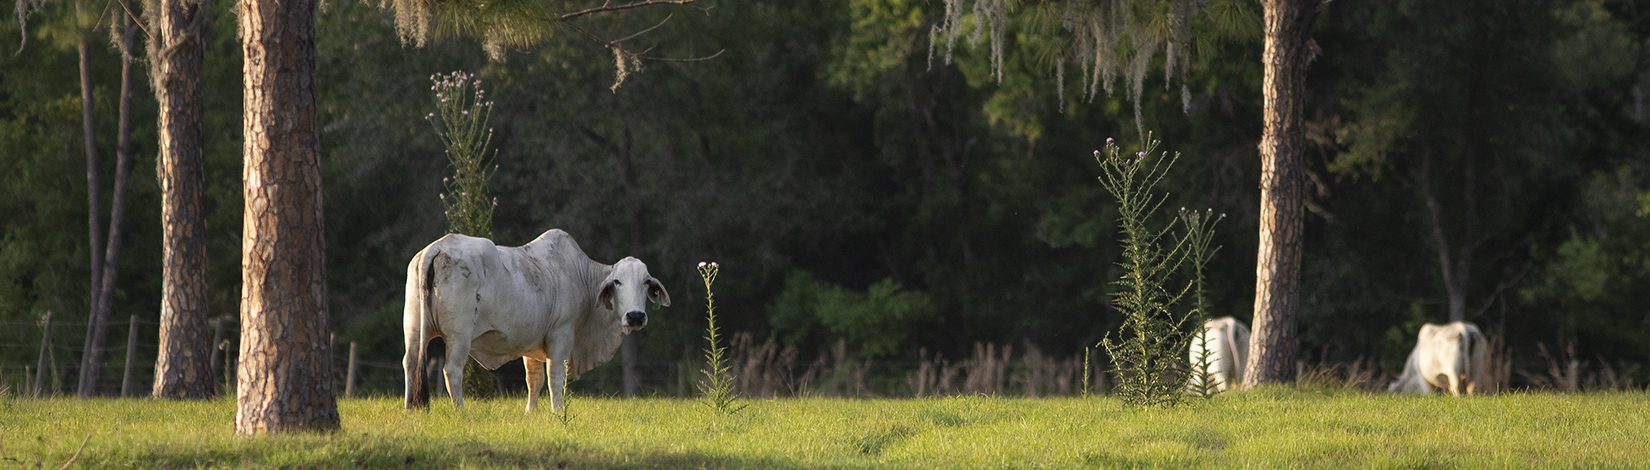 Brahman cattle in pasture at Range Cattle REC in Ona, Florida